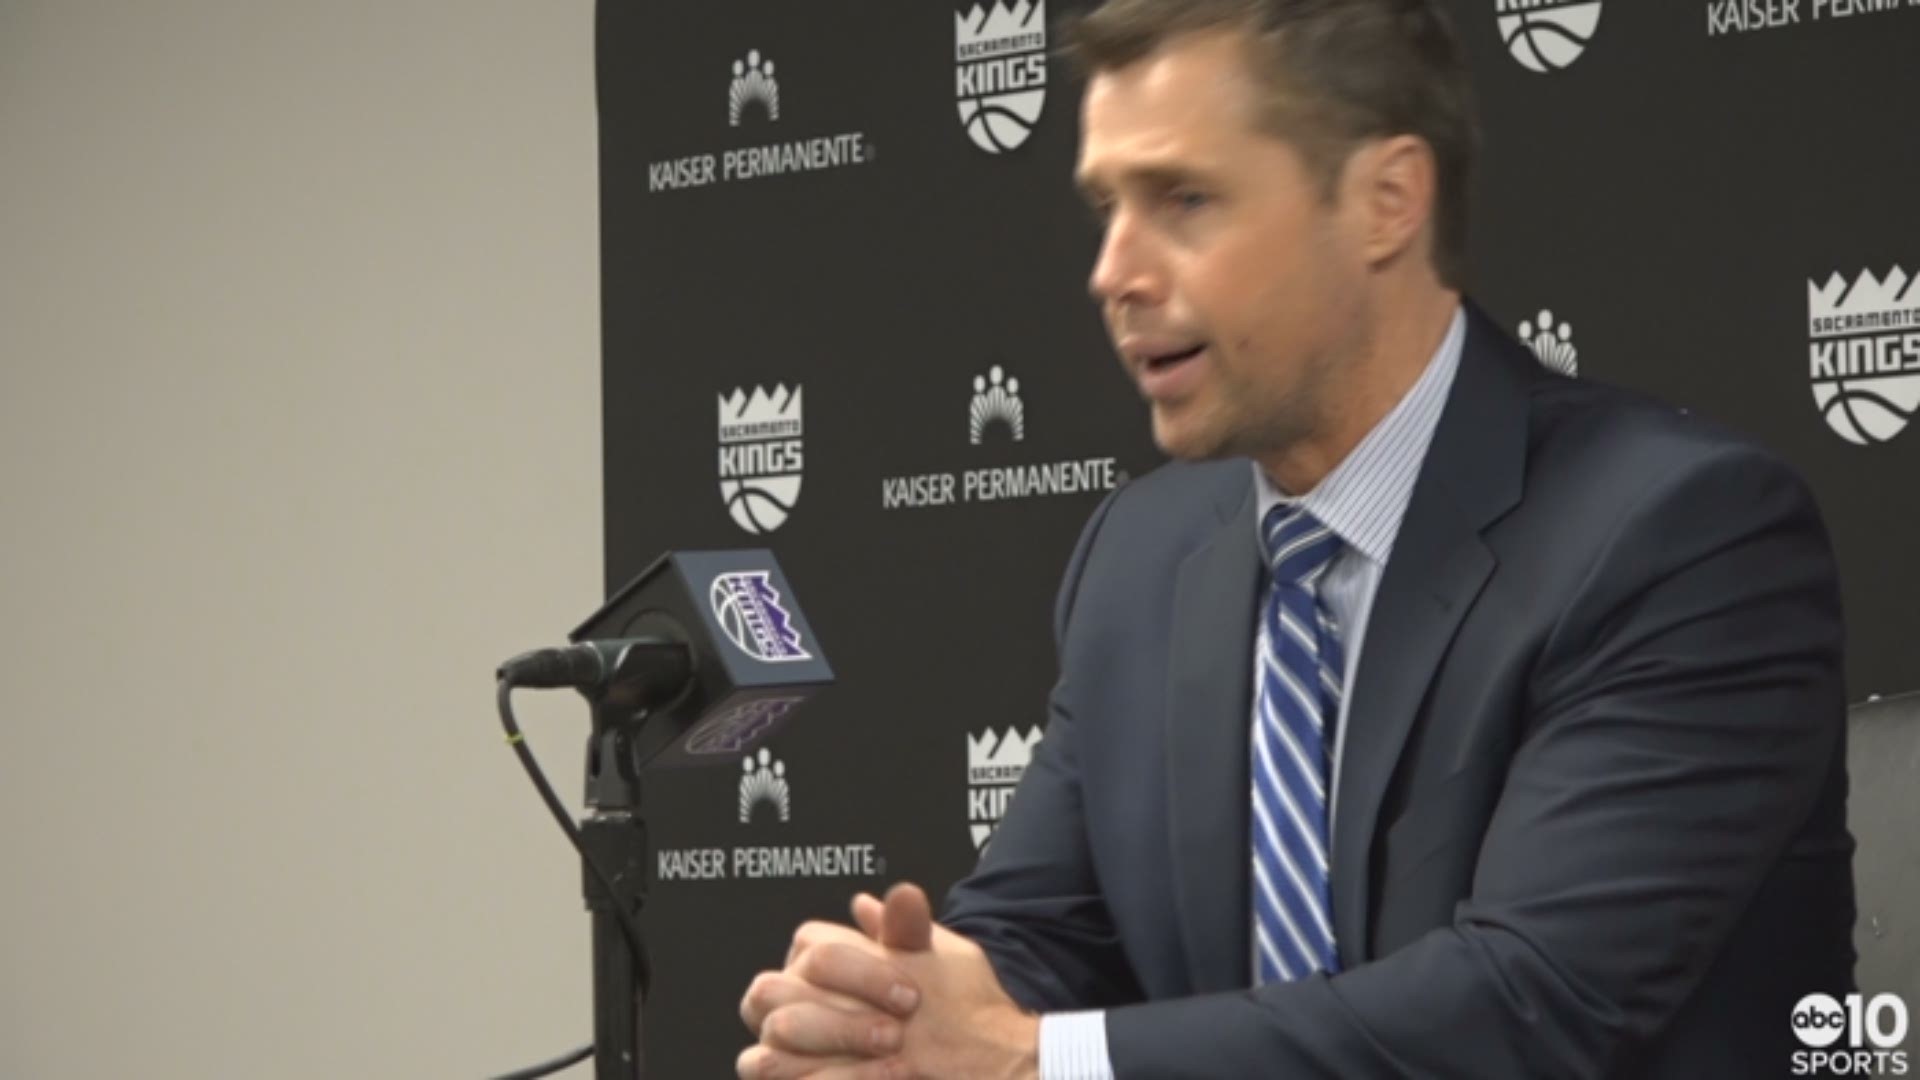 Kings head coach Dave Joerger talks about Monday's win over the Oklahoma City Thunder and the pregame ovation he received from the fans in the wake of a report that the franchise could be moving to dismiss him.